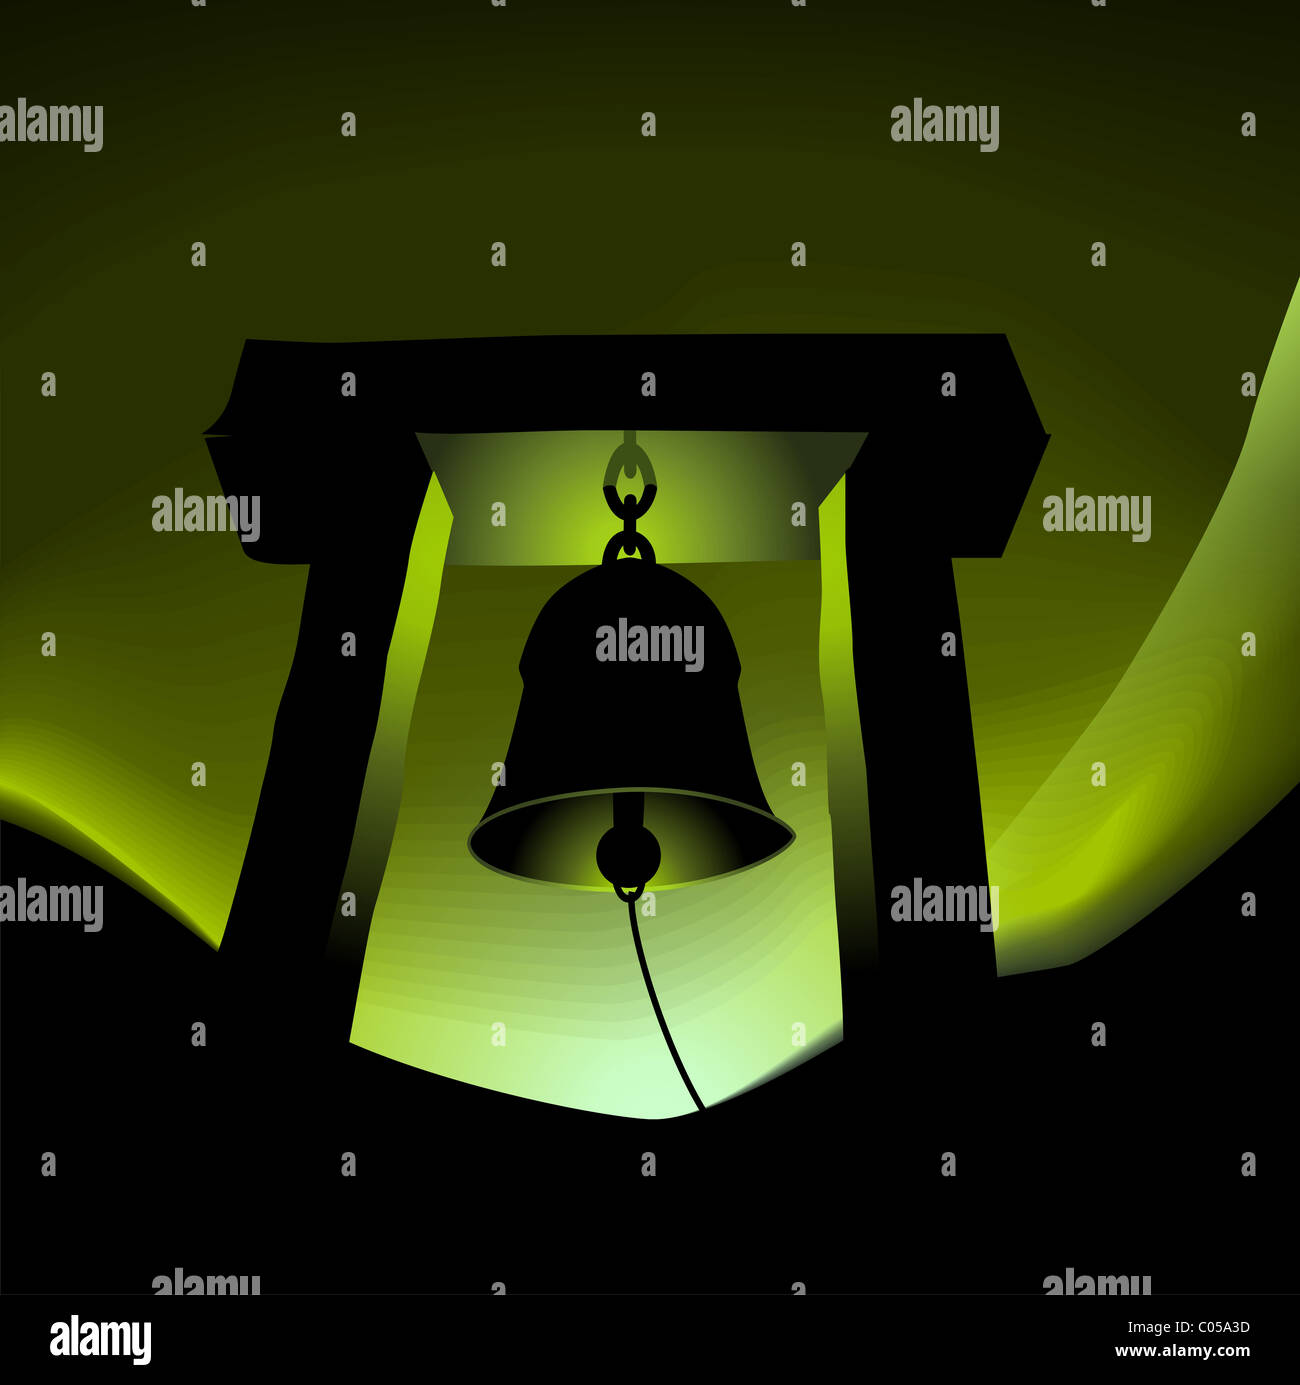 Bell sound effects for Android - Download the APK from Uptodown